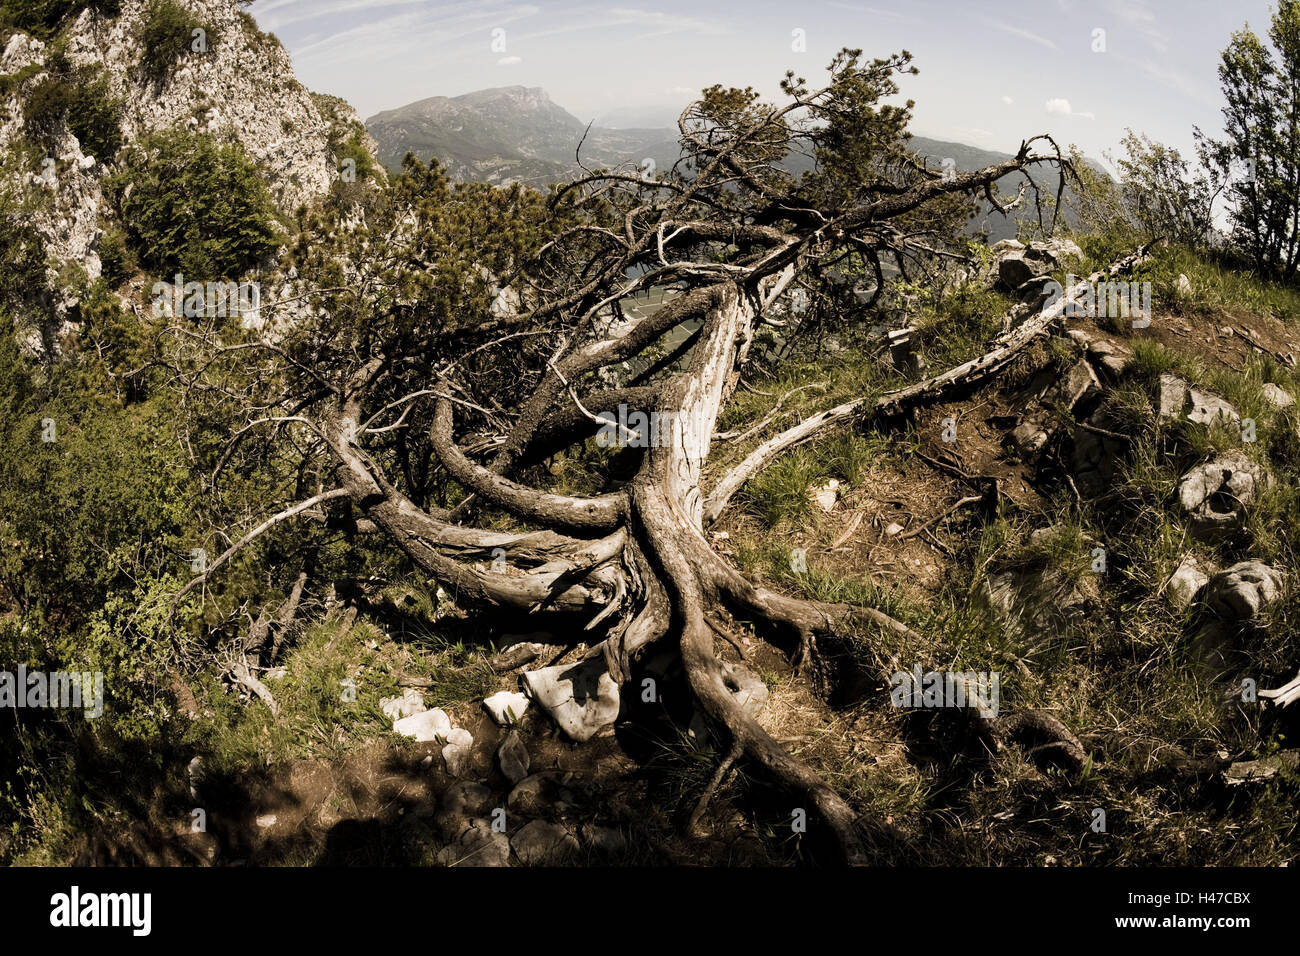 Mountain jaw, conifer, mountains, tree, coniferous wood, mountains, wooden, Drily, root, climate, branches, trunk, rock, cripple jaw, pine, height, height form, plants, Stock Photo